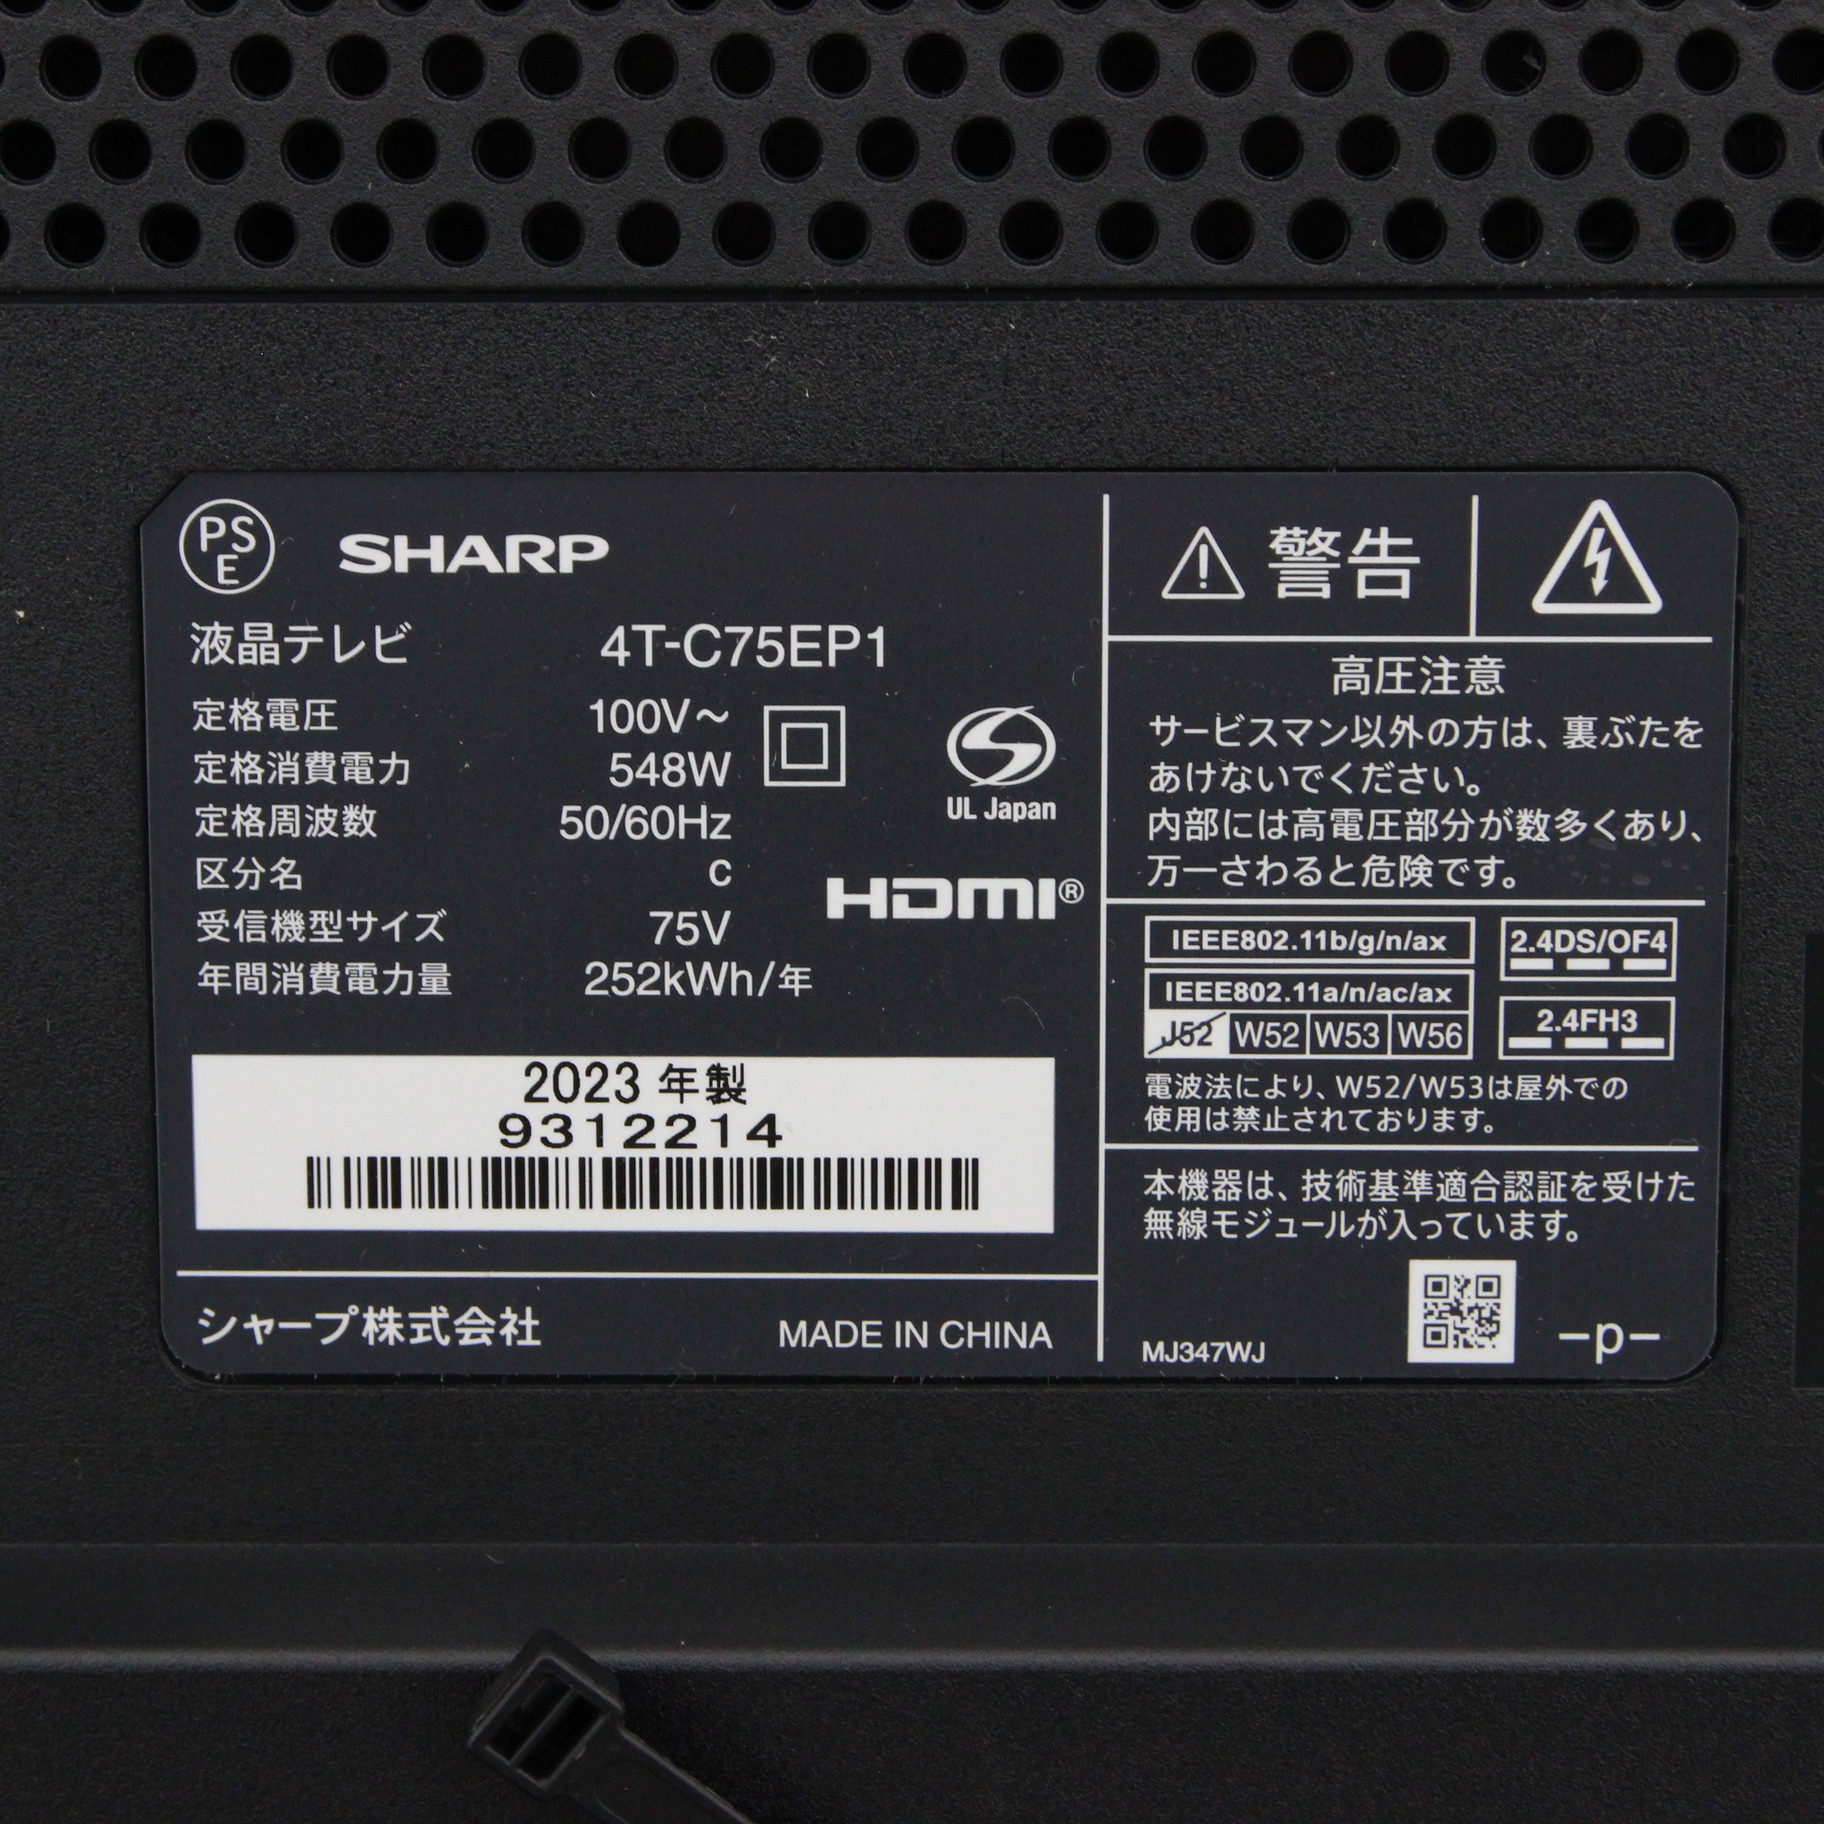 understanding what SHARP TV model codes could represent | hifive.sg